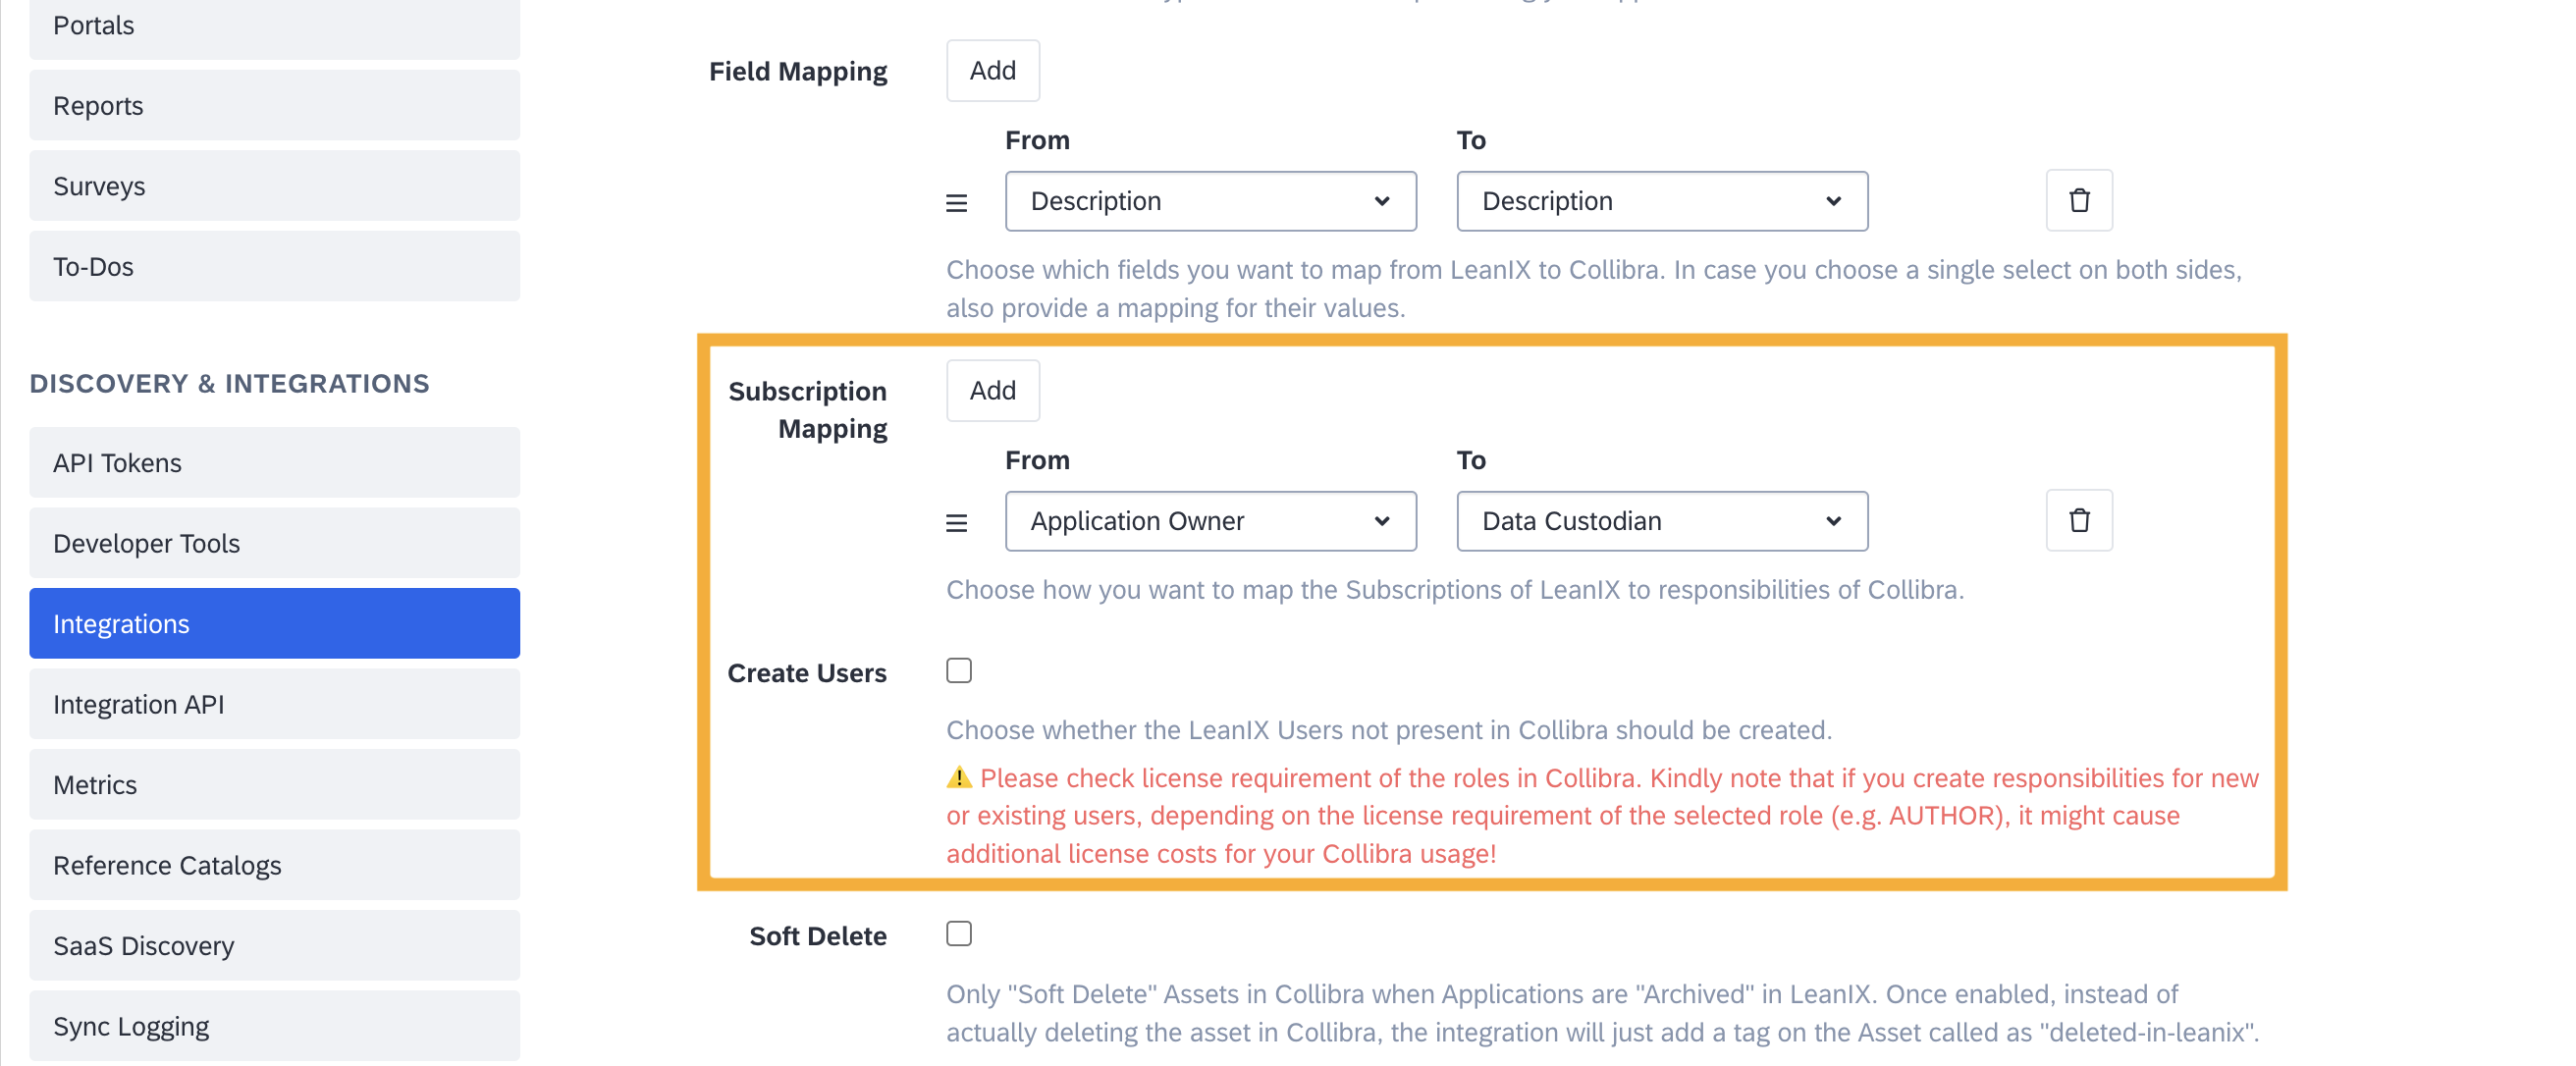 Mapping Subscriptions to Responsibilities and Creating Users